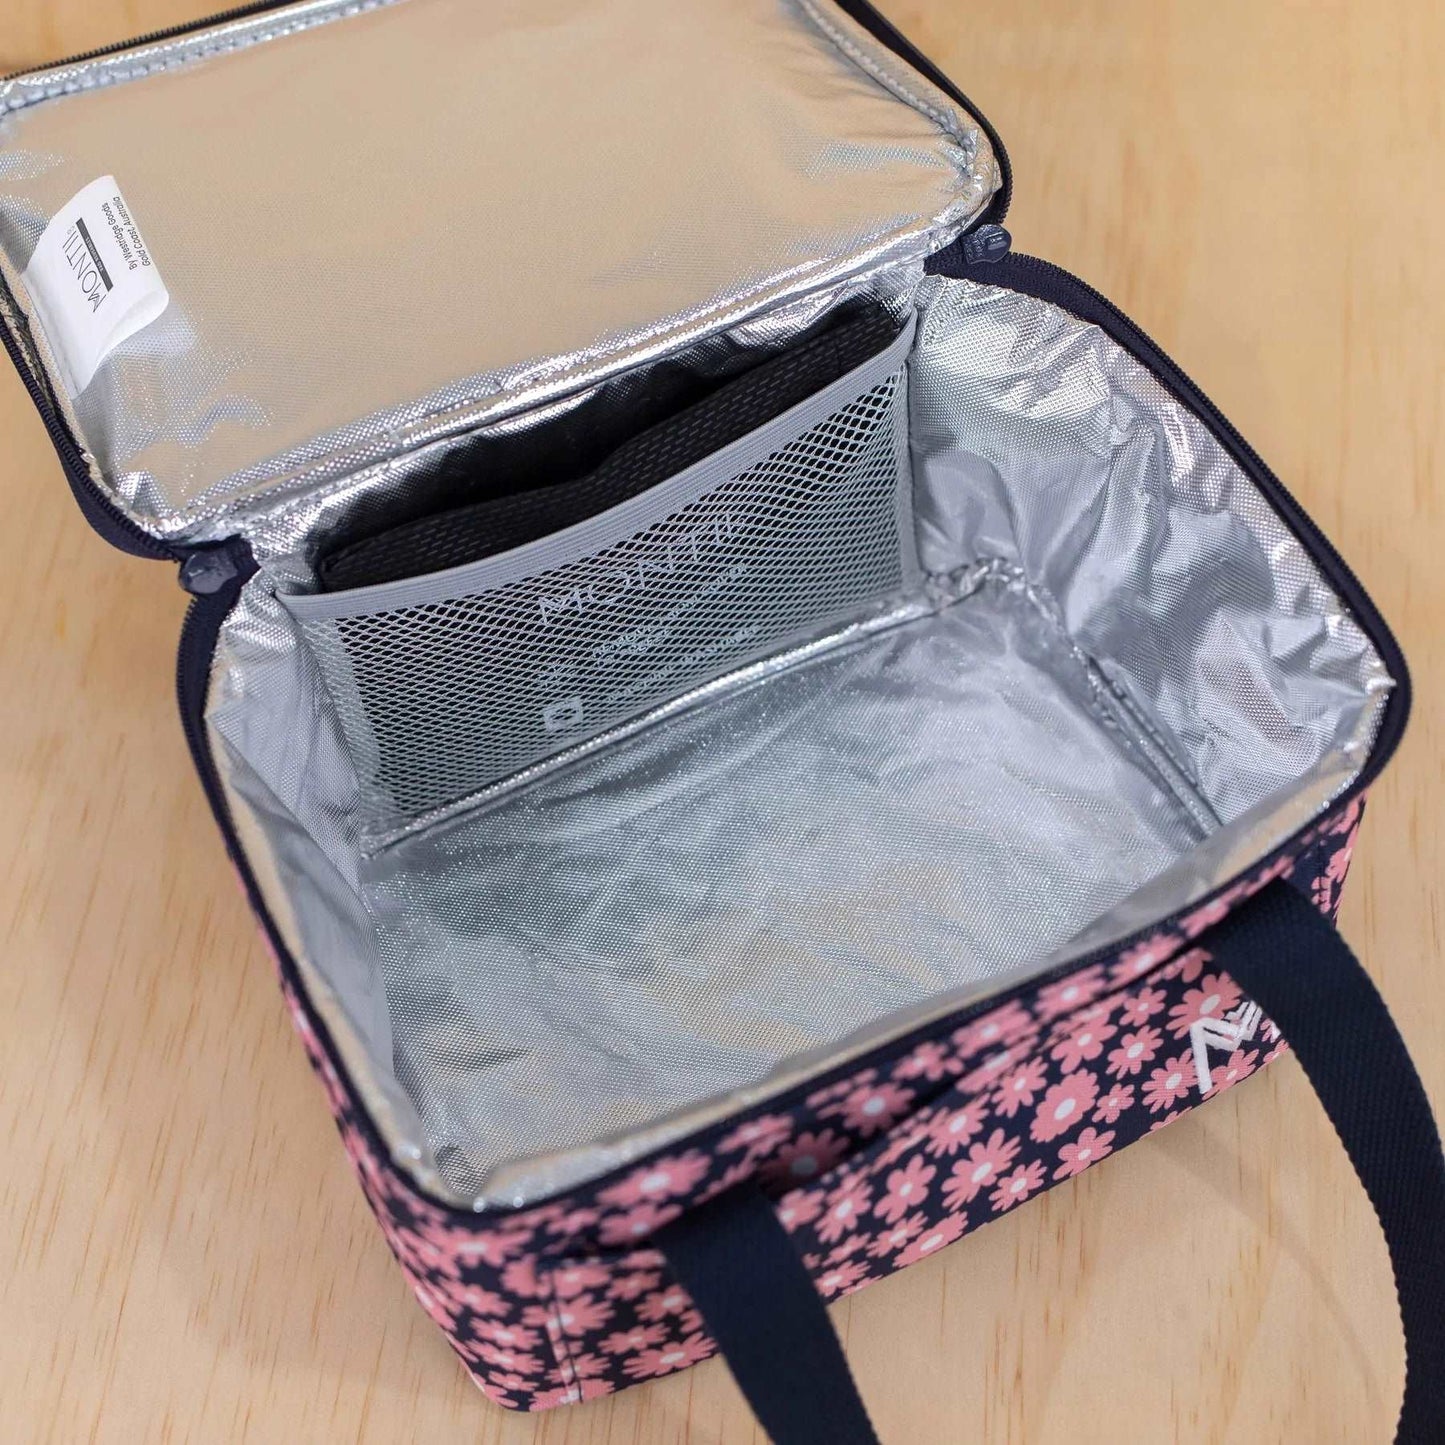 Montiico | Insulated Cooler Bag - LunchBox Inc.